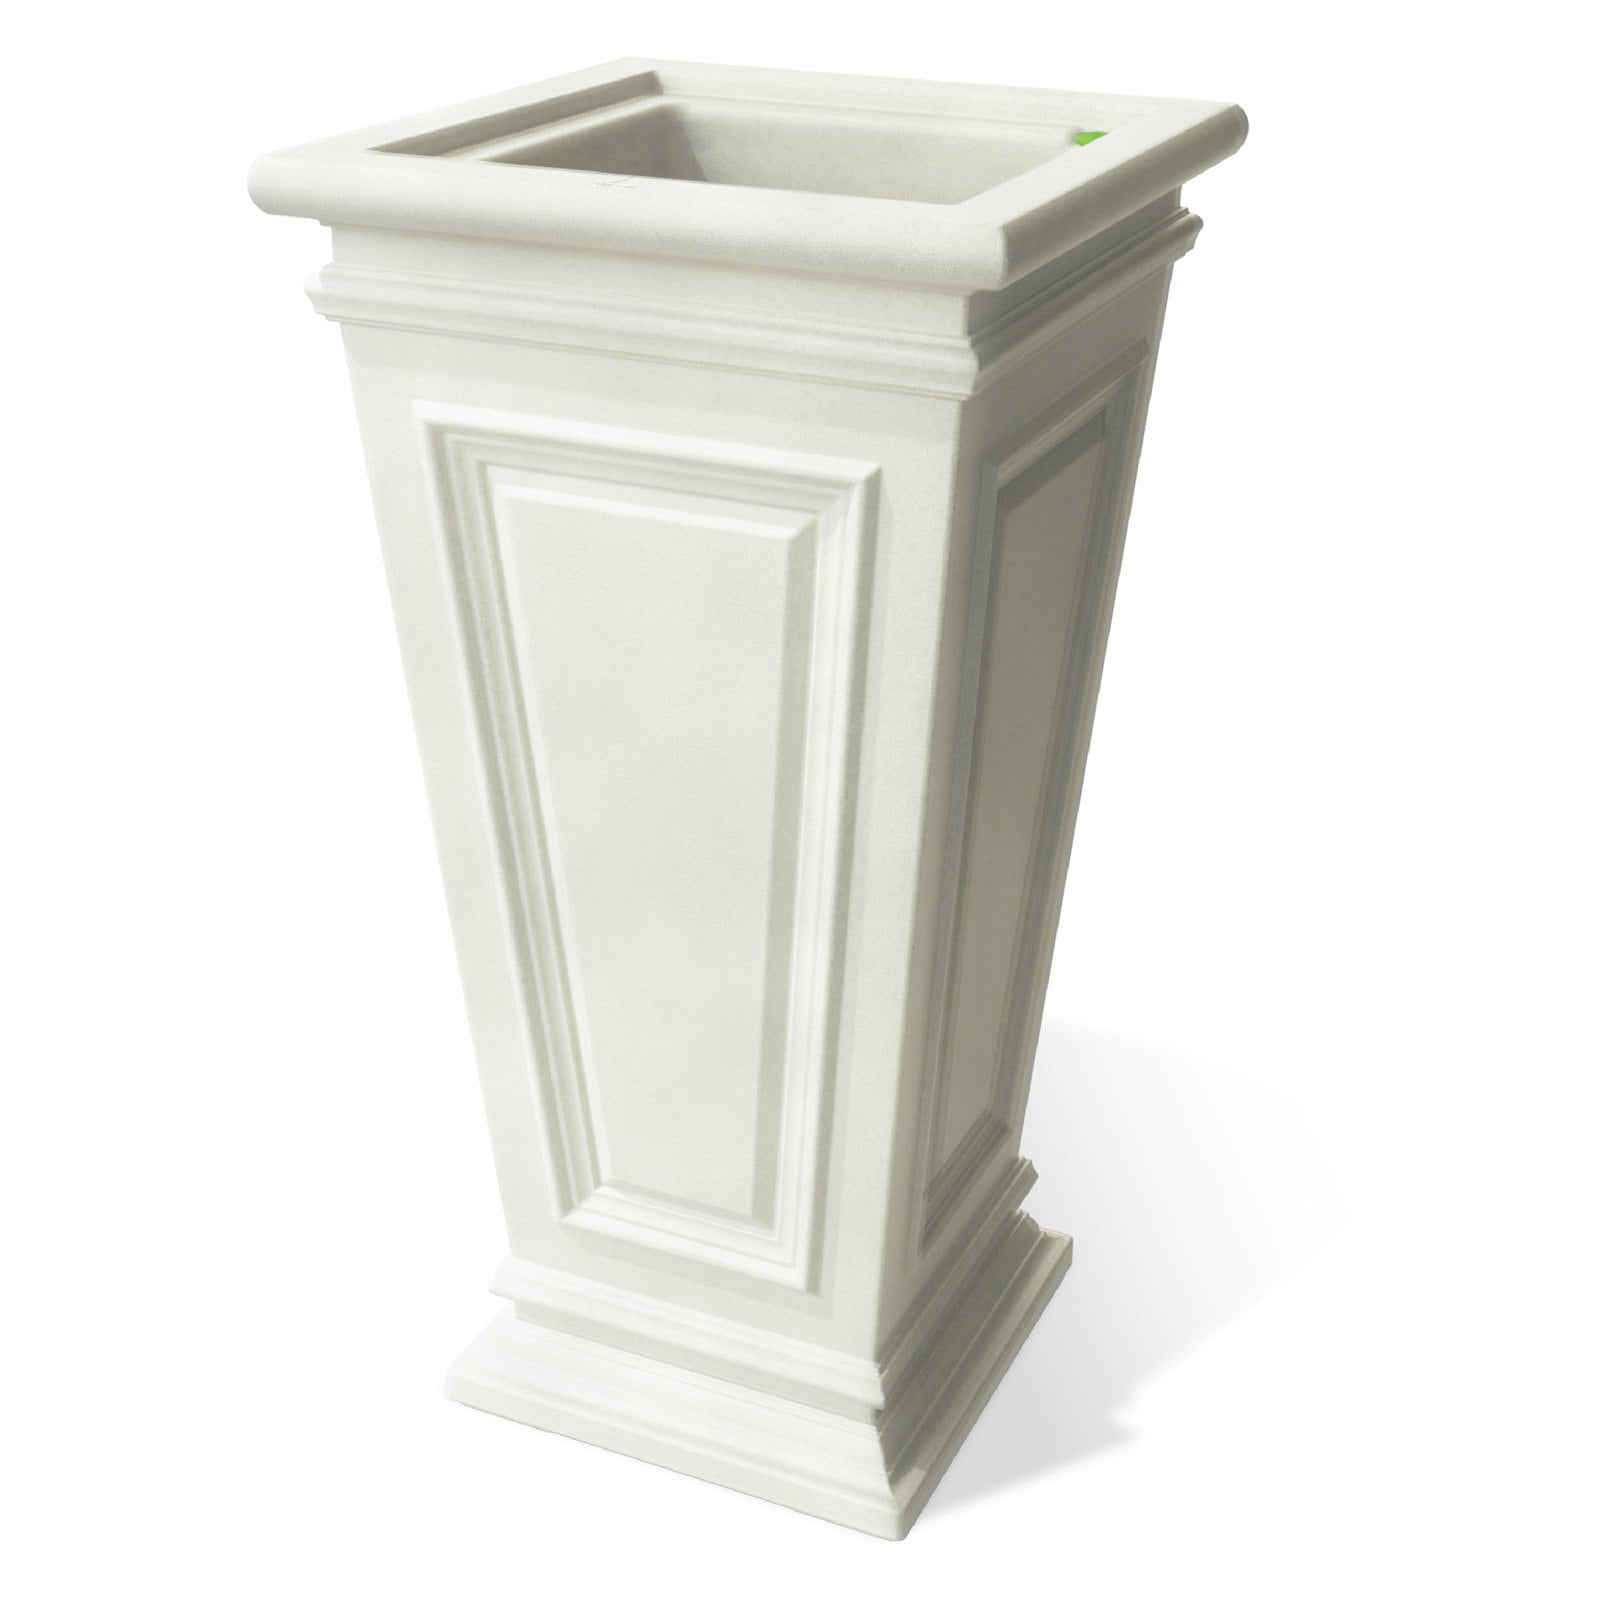 88408 27 X 14 In. Covington Self Watering Planter With Tall Square Taper - White